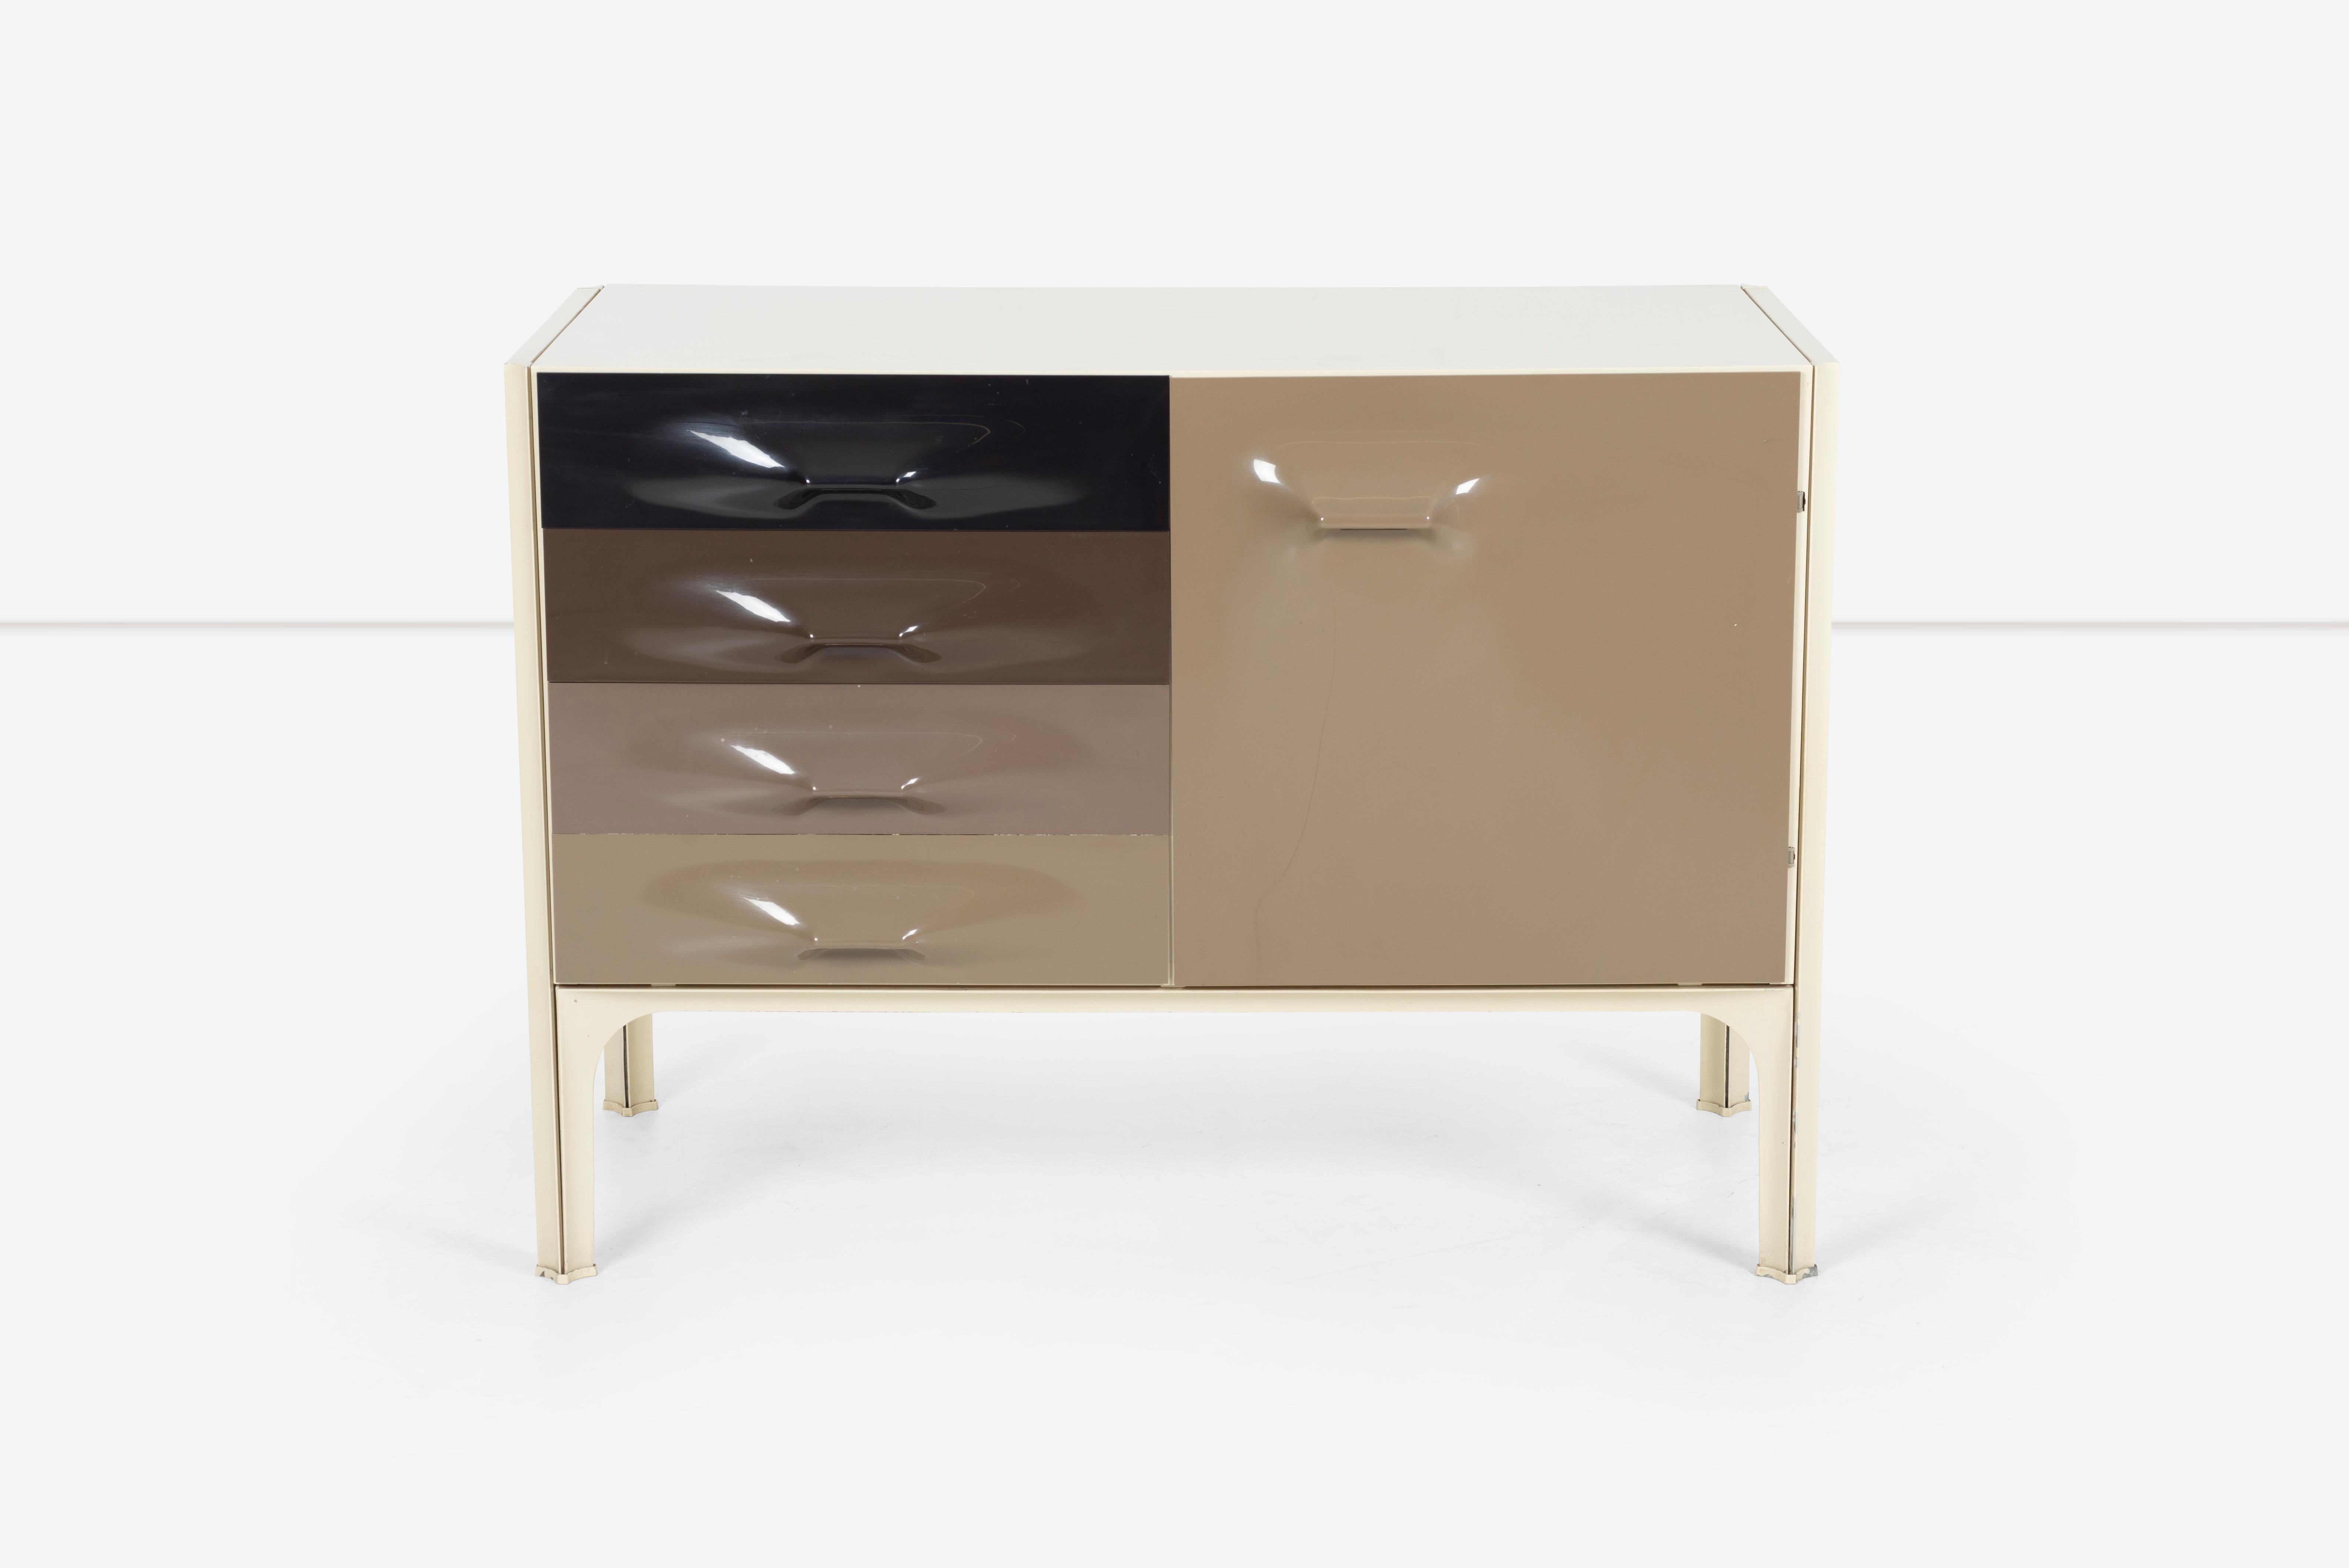 Raymond Loewy DF2000 cabinet 1965
Compagnie d'Esthetique Industrielle (C.E.I.)
Laminated wood, enameled aluminum, molded acrylic
Cabinet features four drawers and one door concealing one adjustable shelf. Stamped manufacturer's MarkDF 2000 Made